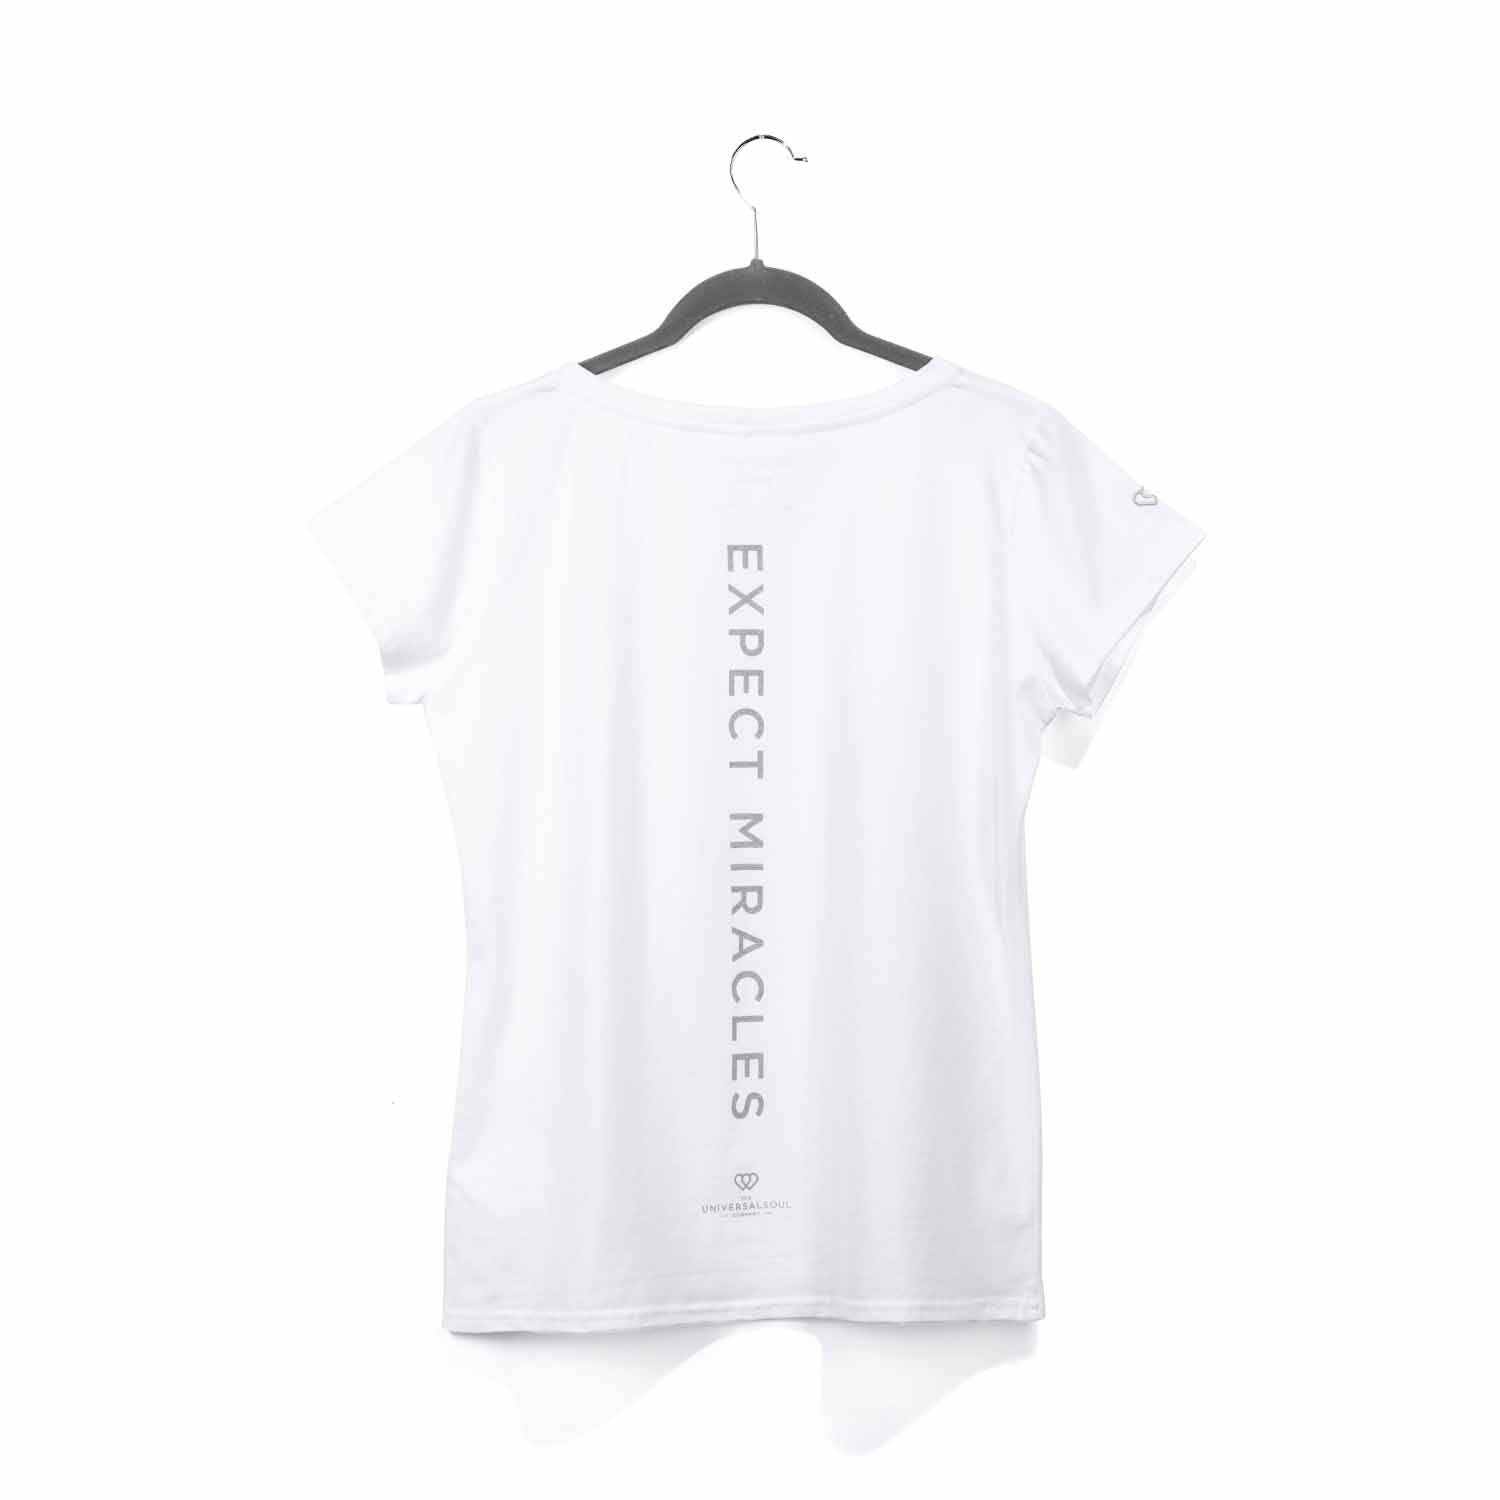 Expect Miracles Hand Embroidered T-shirt - short sleeved - Limited Edition Back - The Universal Soul Company